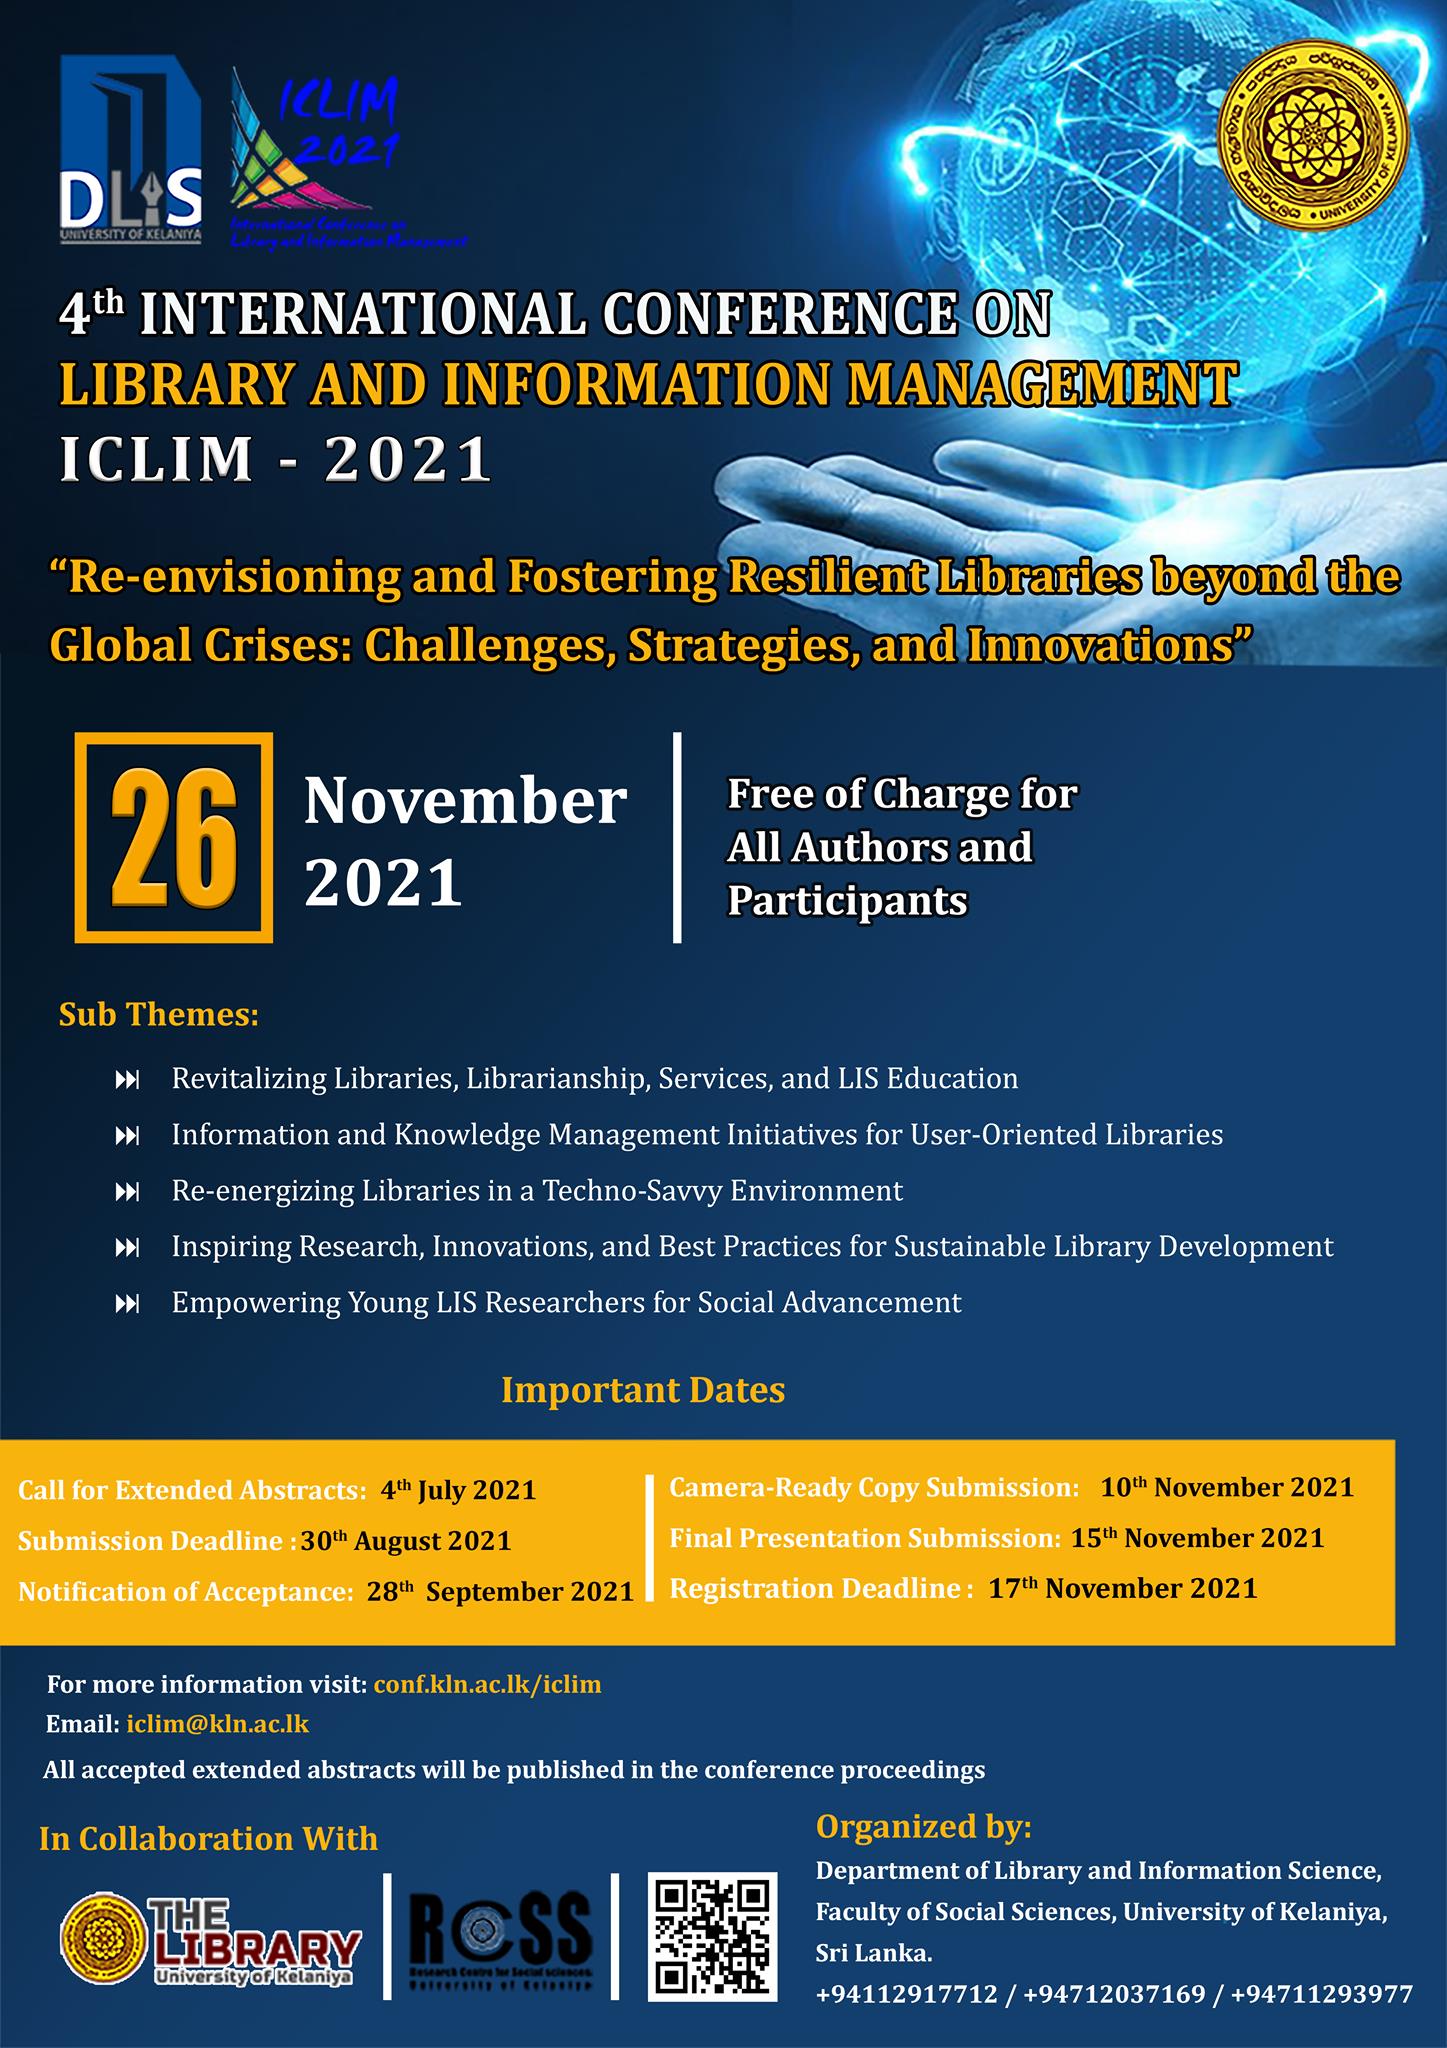 Call for Extended Abstracts for 4th International Conference on Library and Information Management (ICLIM 2021)